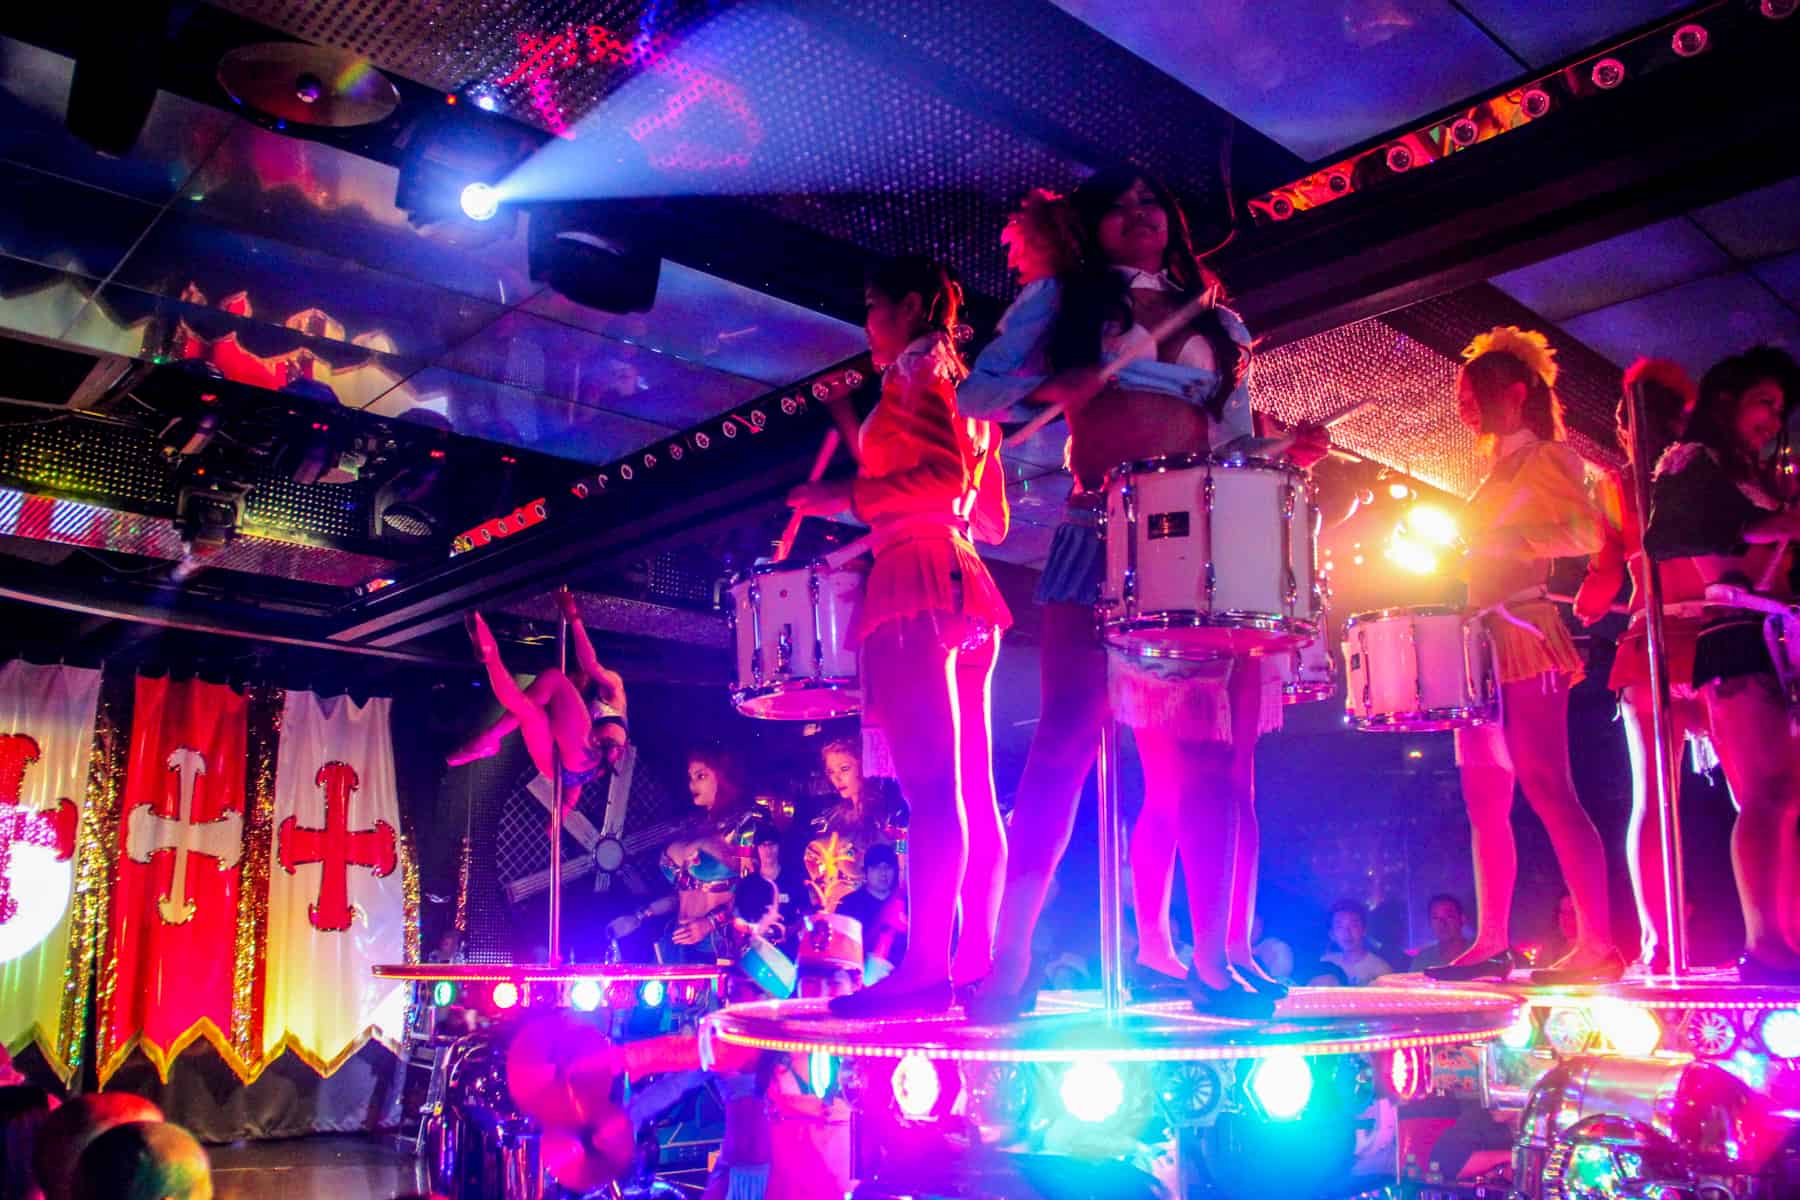 Women pole dancing and playing drums during a Tokyo Robot Restaurant show performance. 